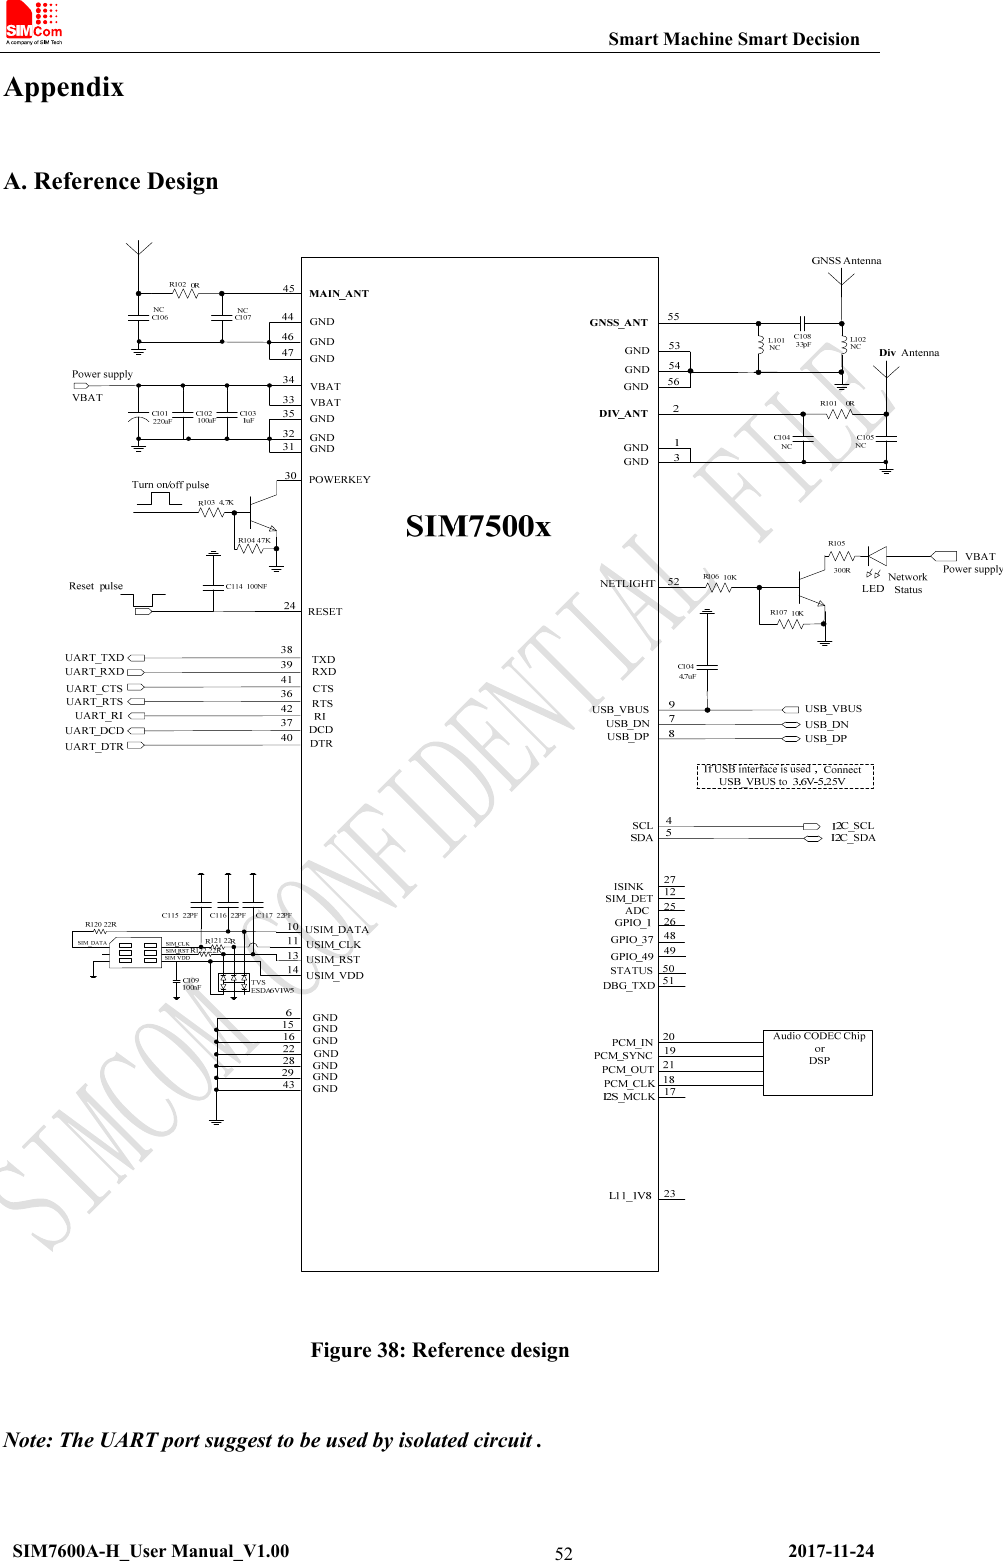                                                           Smart Machine Smart Decision  SIM7600A-H_User Manual_V1.00                                                     2017-11-24 52Appendix A. Reference Design  Figure 38: Reference design  Note: The UART port suggest to be used by isolated circuit .   